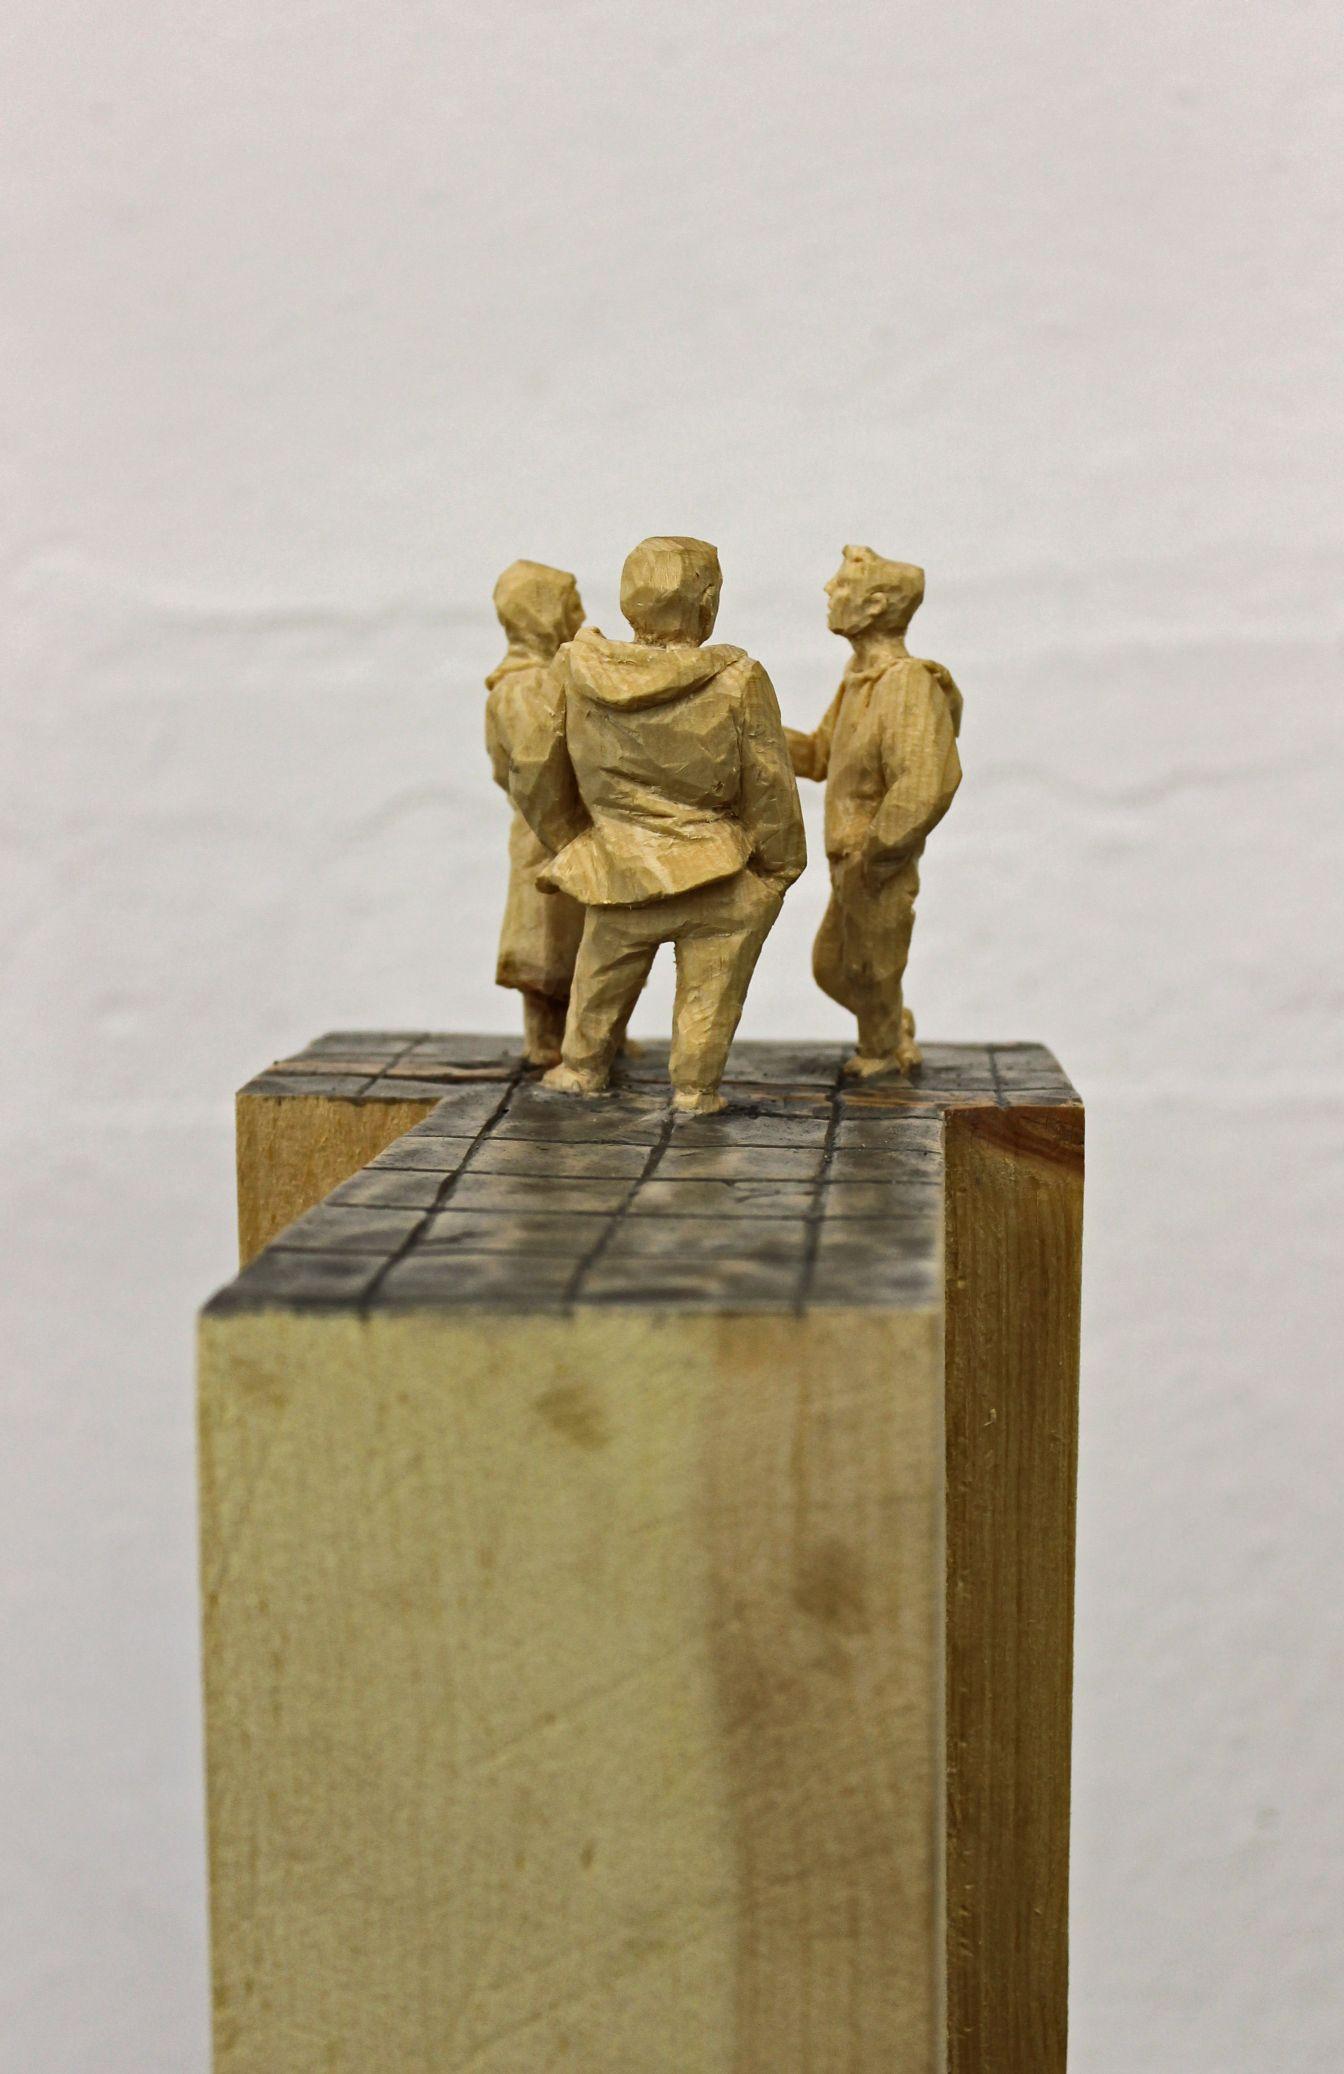 The Dispute - Wood sculpture, figurative sculpture, wood carving - Contemporary Sculpture by Philipp Liehr